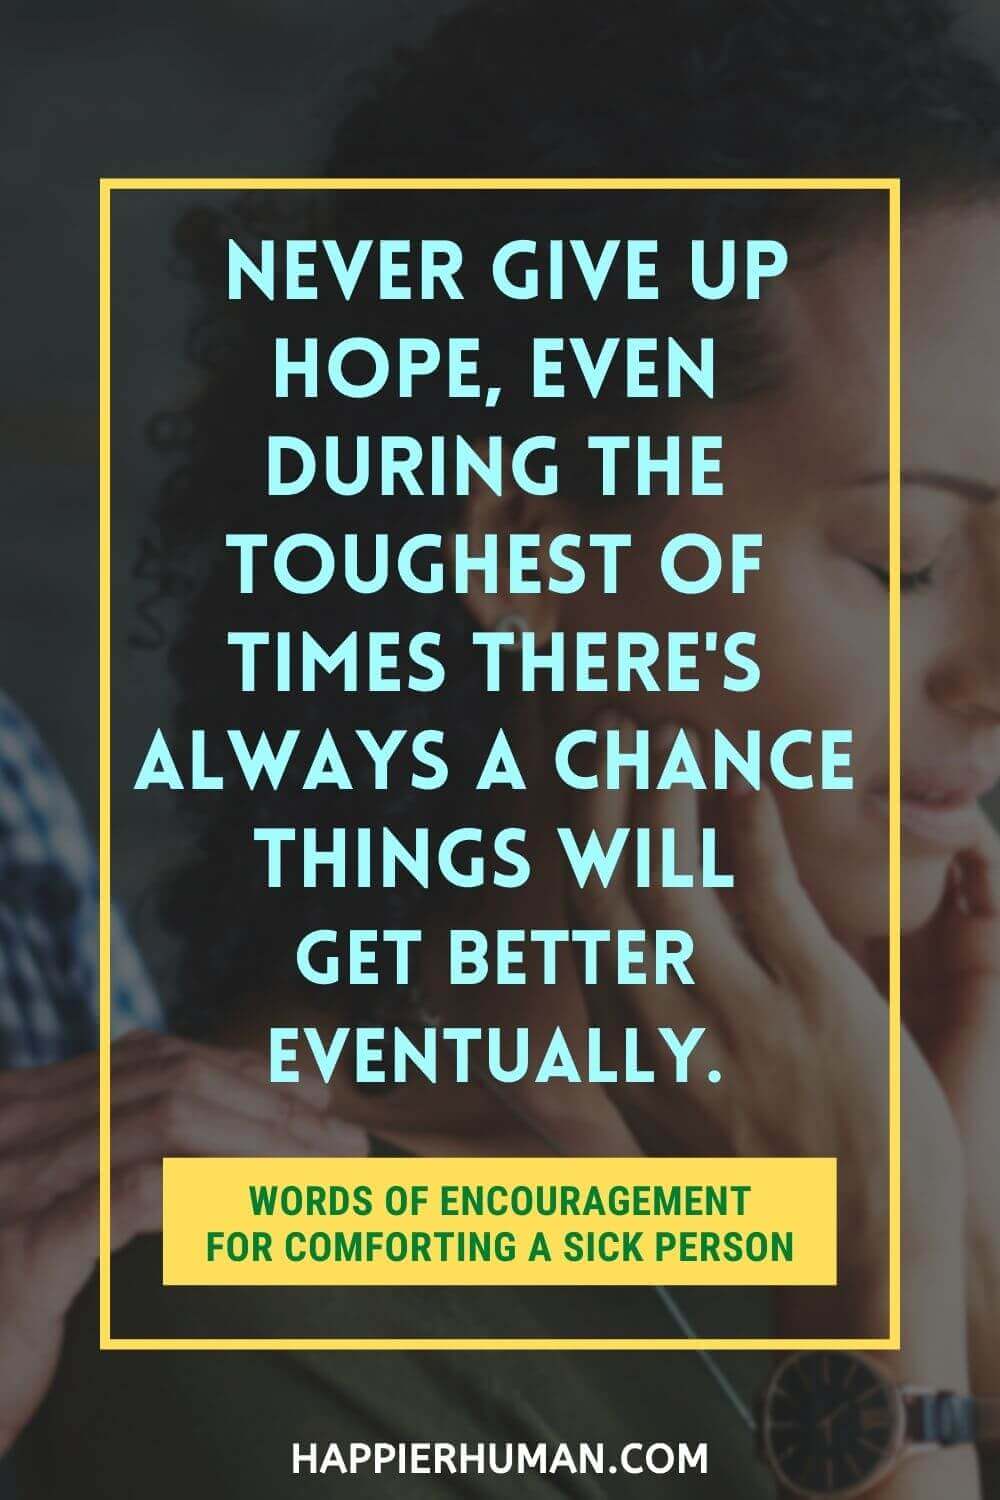 Words of Encouragement for Sick Person - Never give up hope, even during the toughest of times there's always a chance things will get better eventually. | how to comfort a sick person over text | what to say when someone is not feeling well | bible words of encouragement for sick person